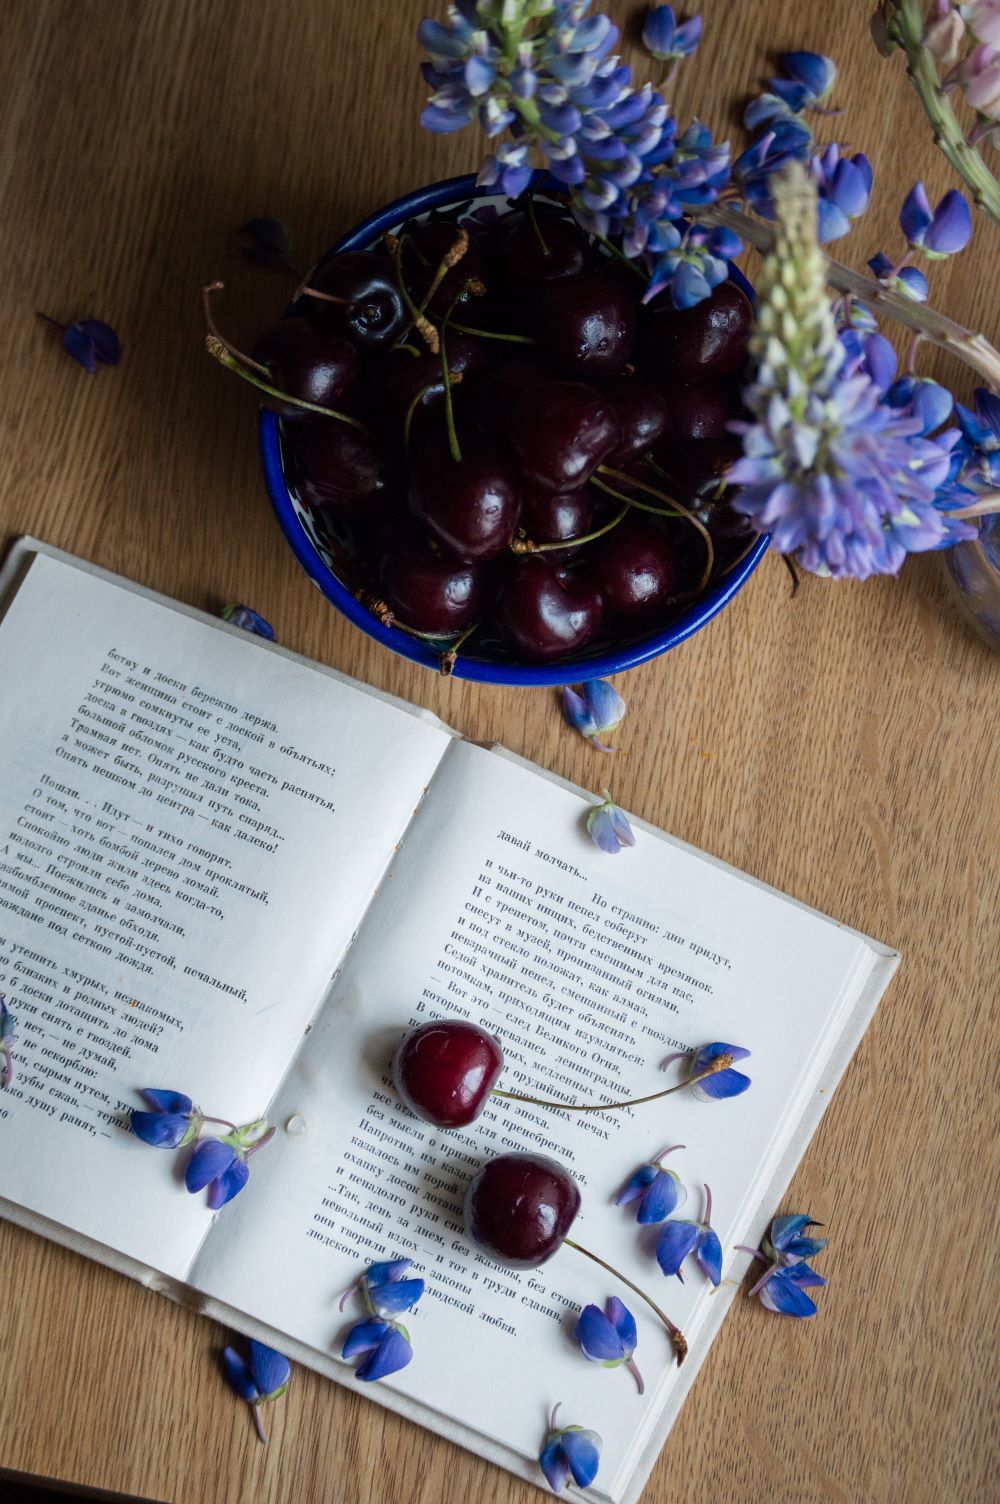 Book with cherries and flower